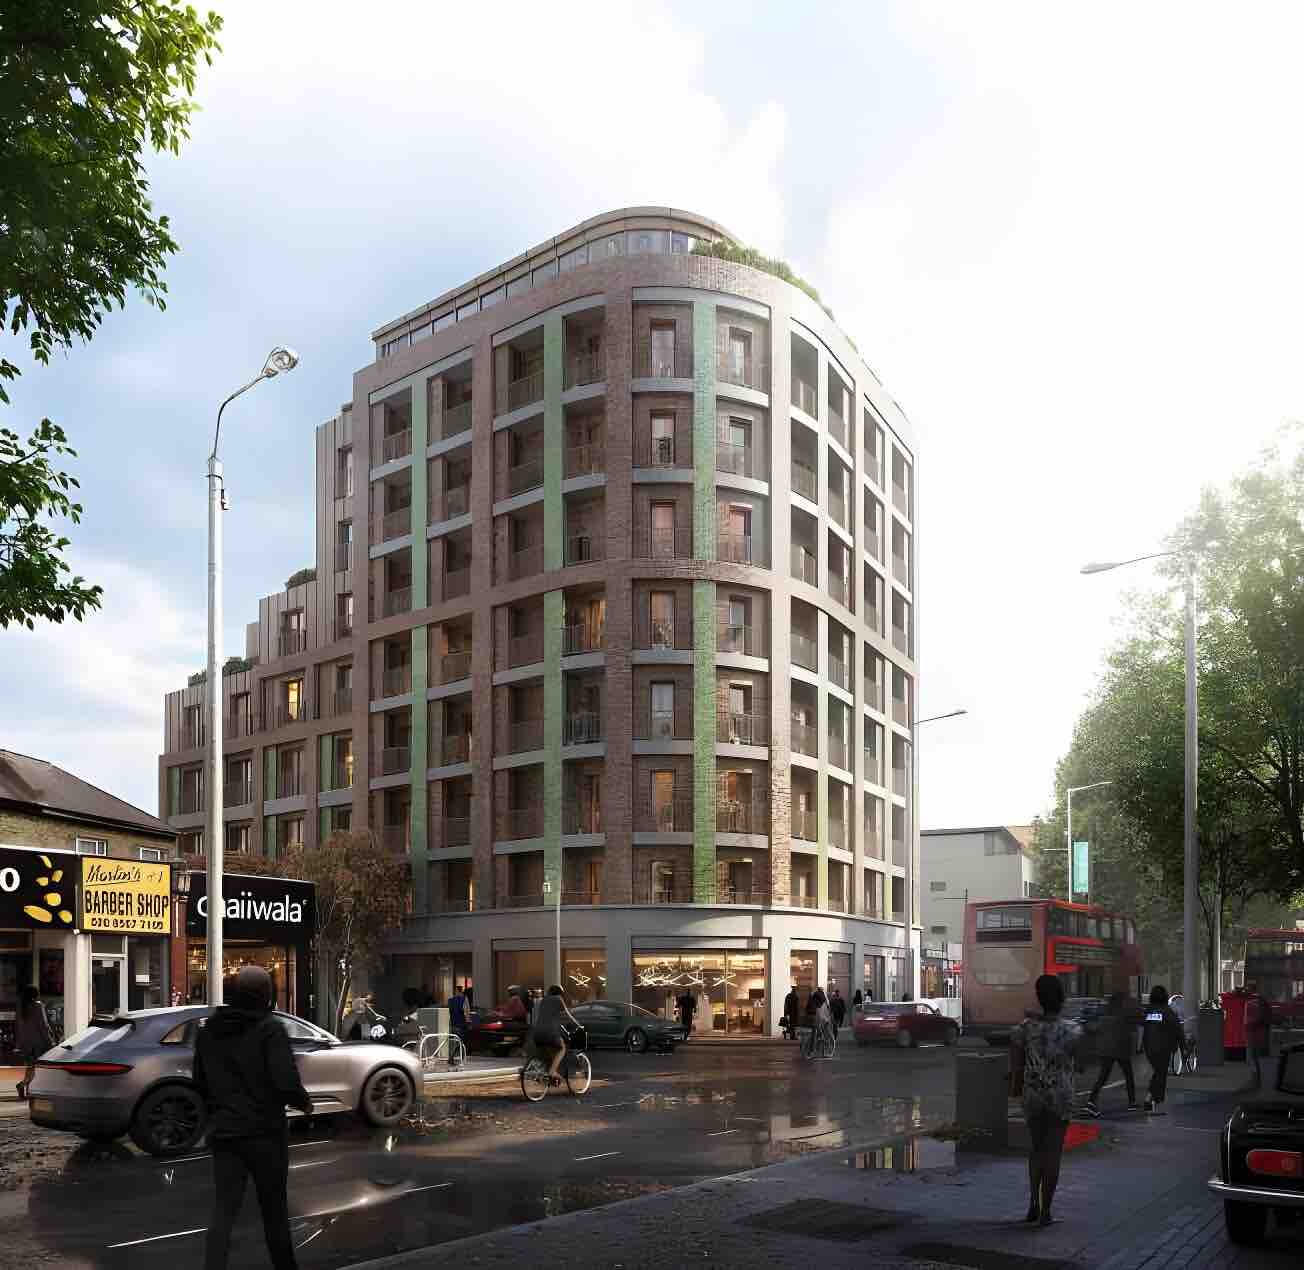 Substantial mixed-use development for Ealing, London, W13